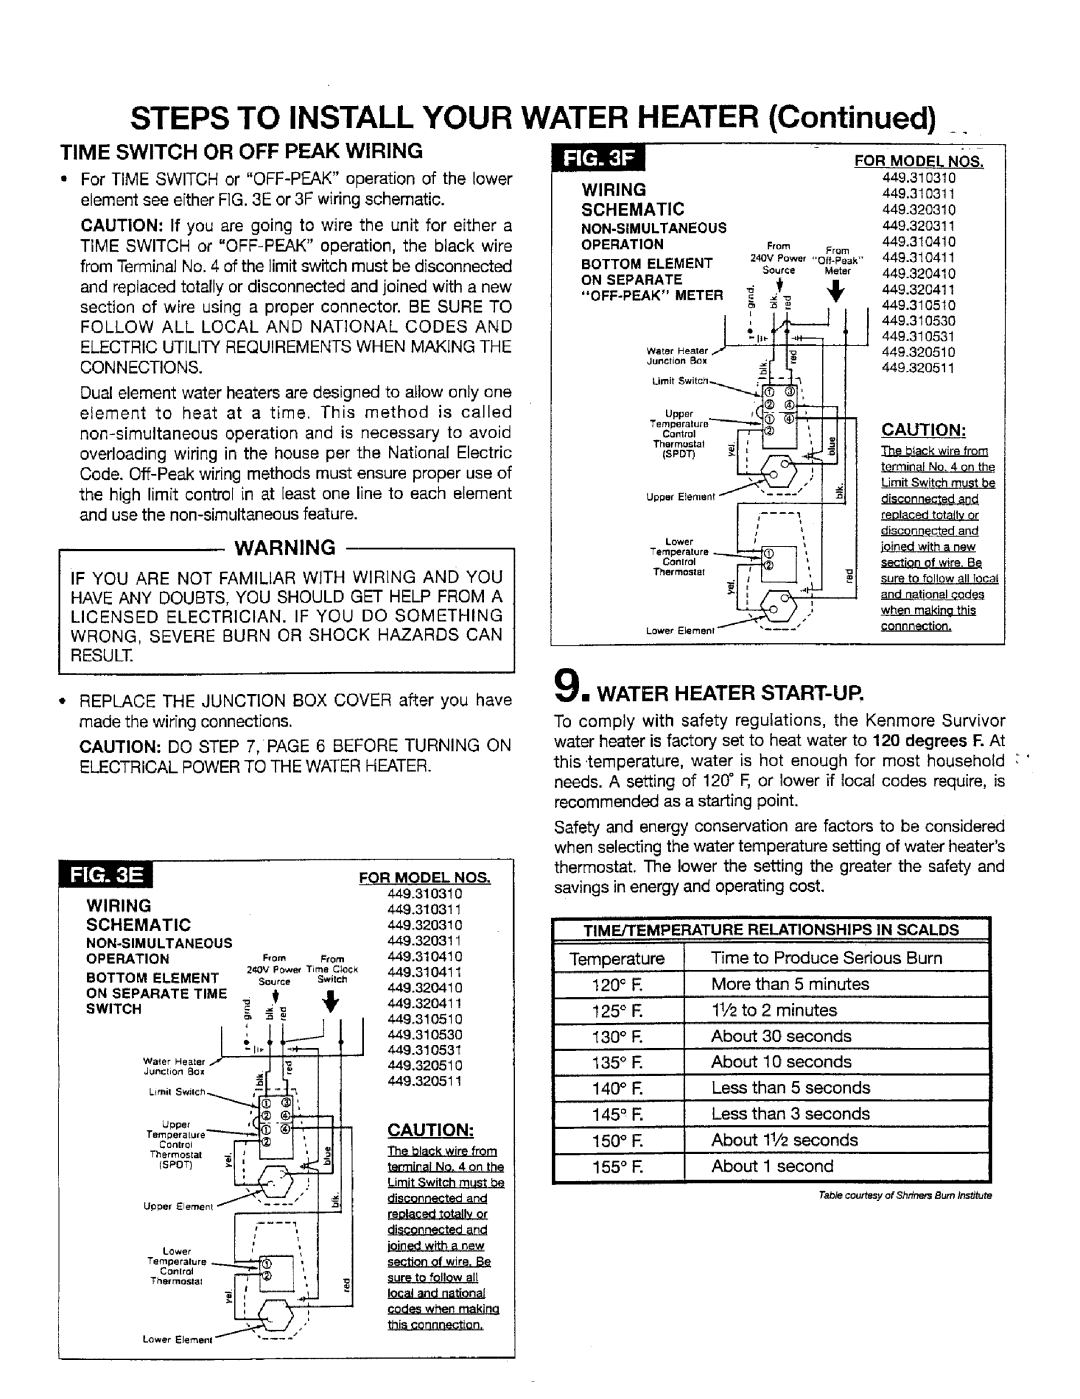 Sears 449.31041 Time Switch Or Off Peak Wiring, I al, Water Heater Start-Up, STEPS TO INSTALL YOUR WATER HEATER Continued 